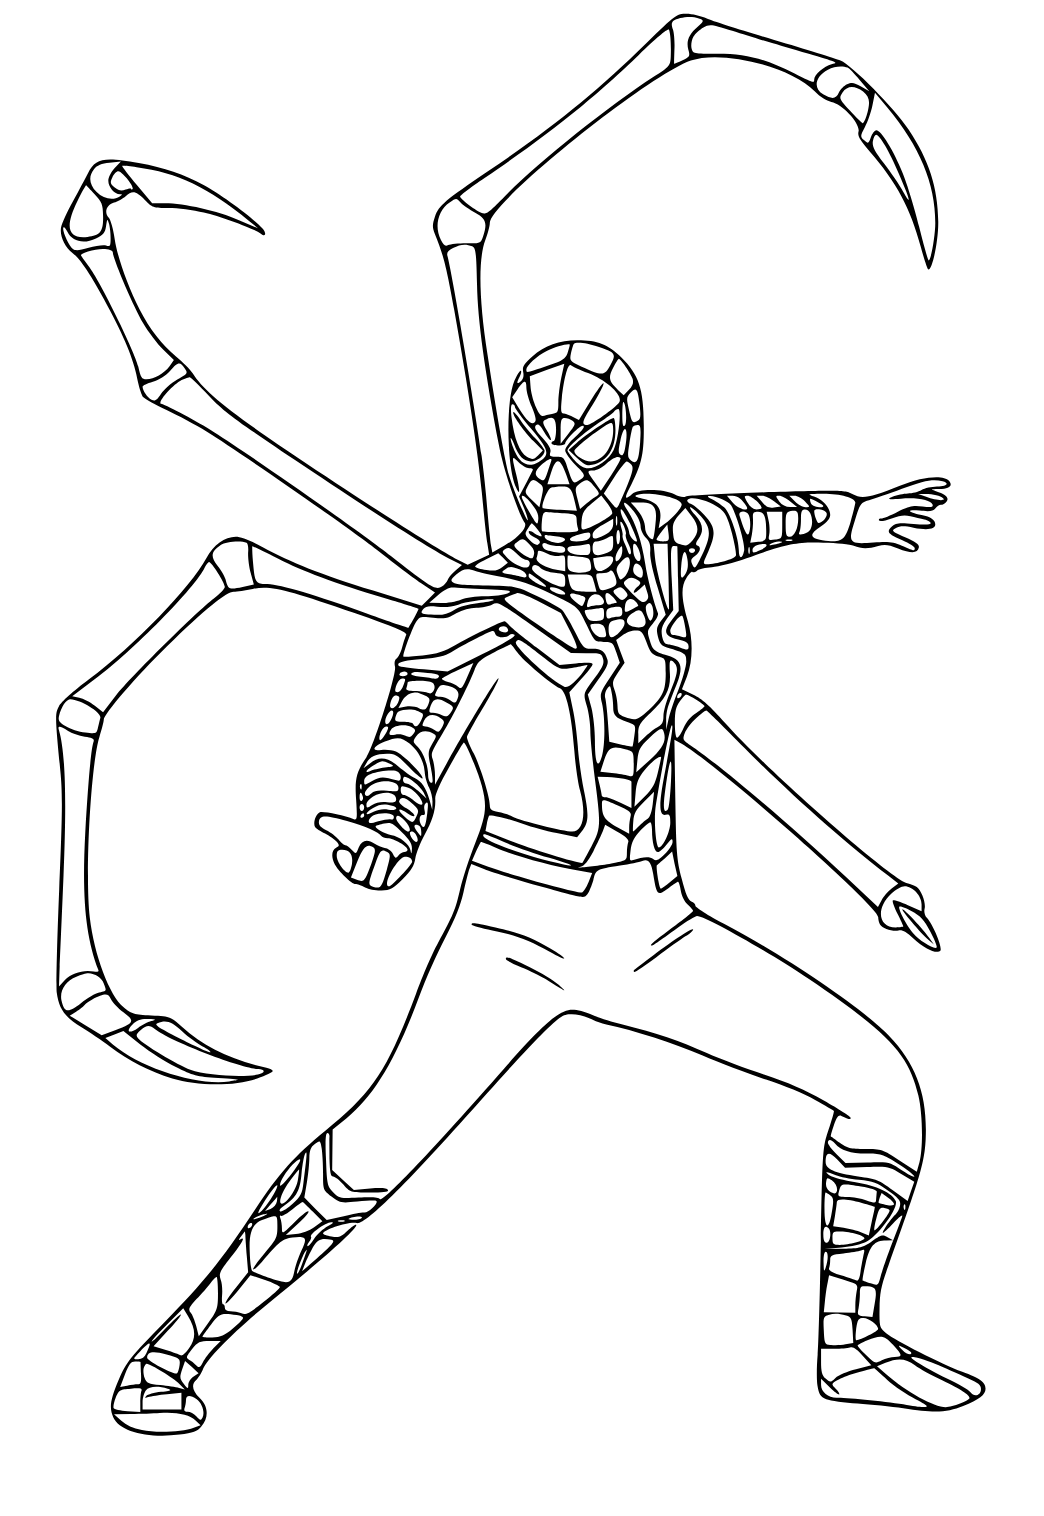 Free printable iron spider expectation coloring page for adults and kids